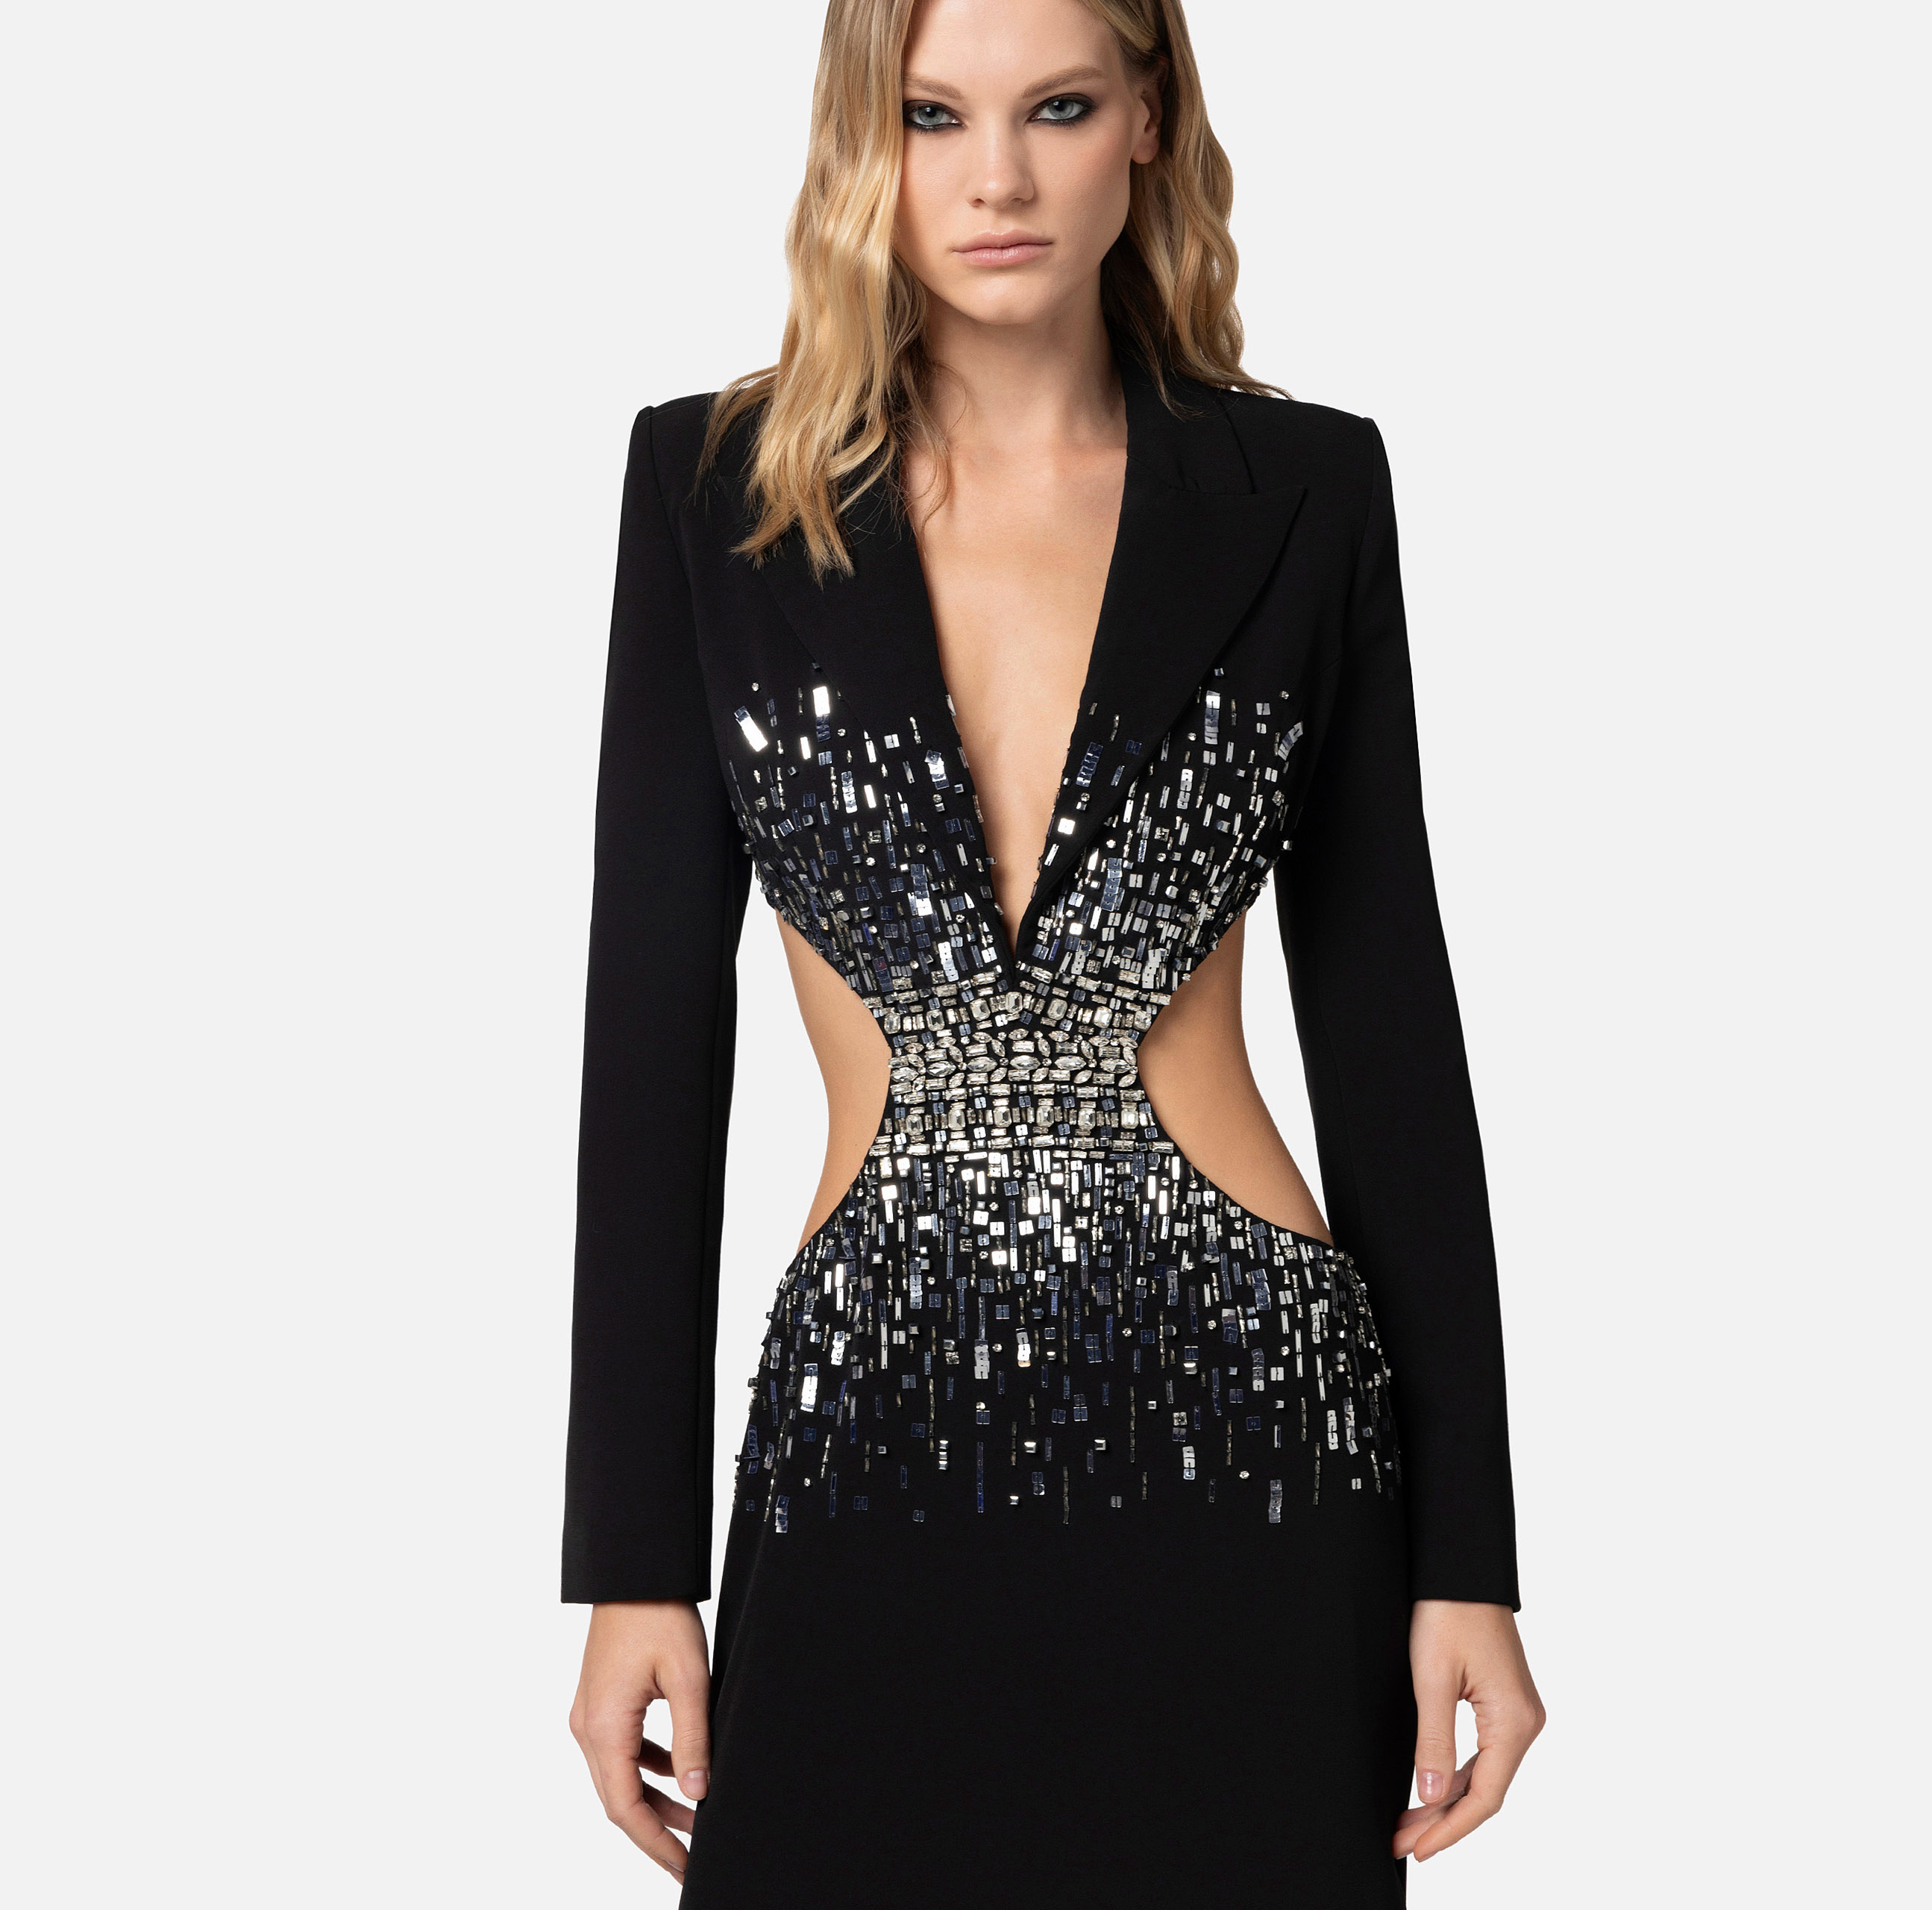 Red carpet dress in crêpe fabric with cut-out and embroidery - Elisabetta Franchi